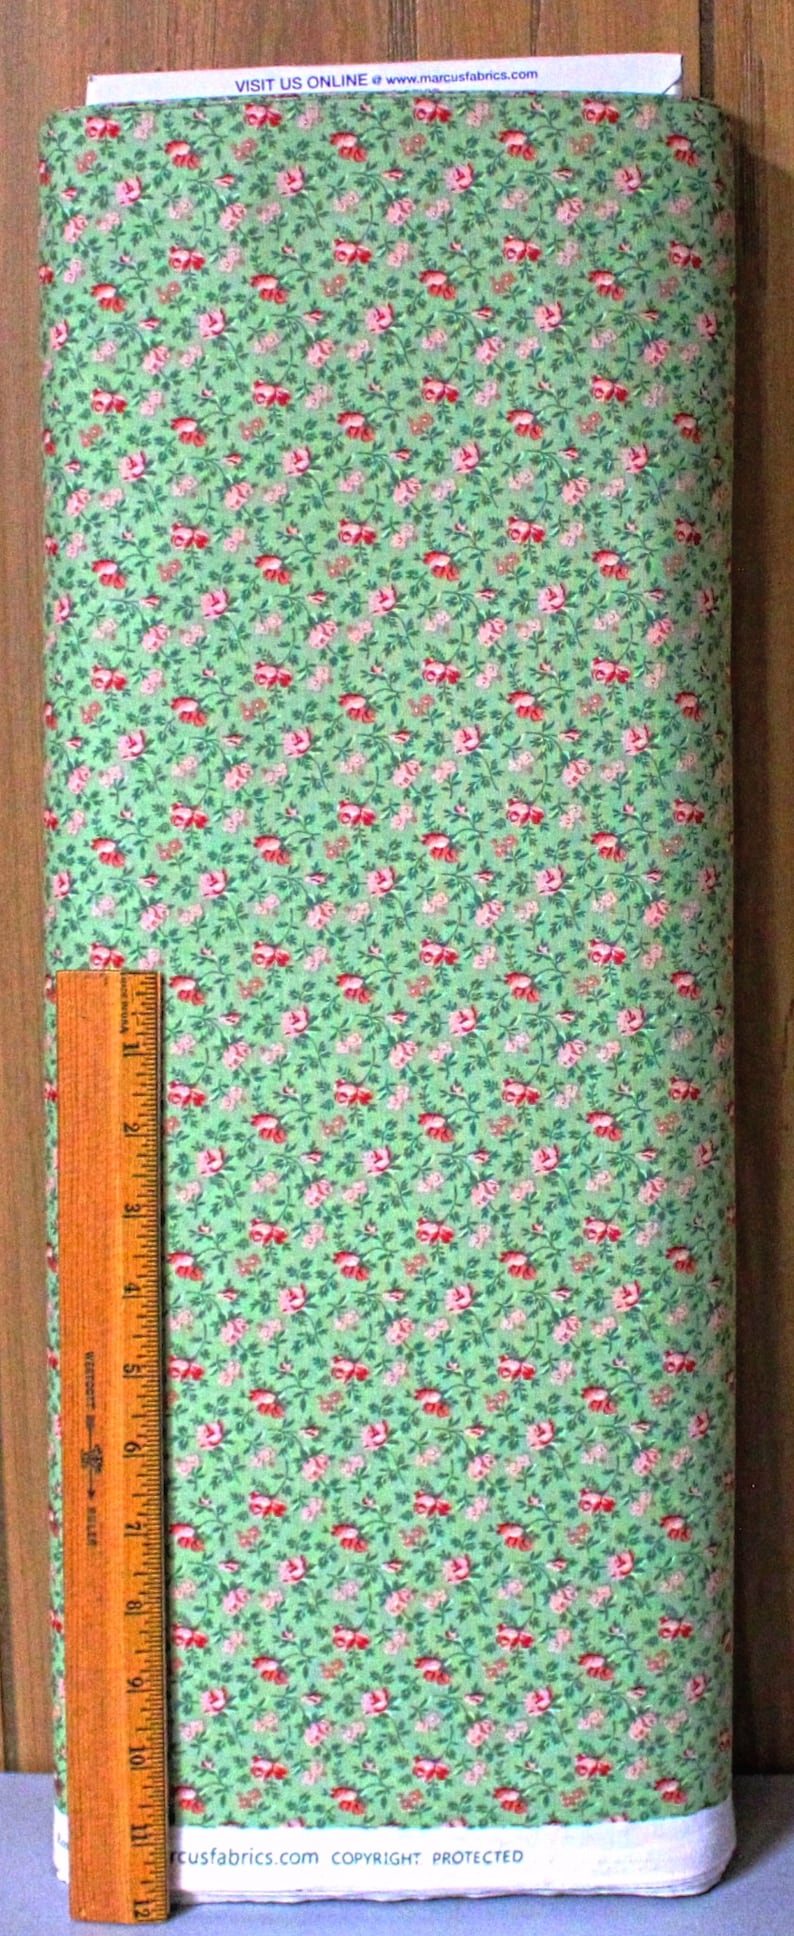 Fabric With Small Flowers, Medium Green Fabric, Valance Fabric, Allover Fabric, Calico Print image 3